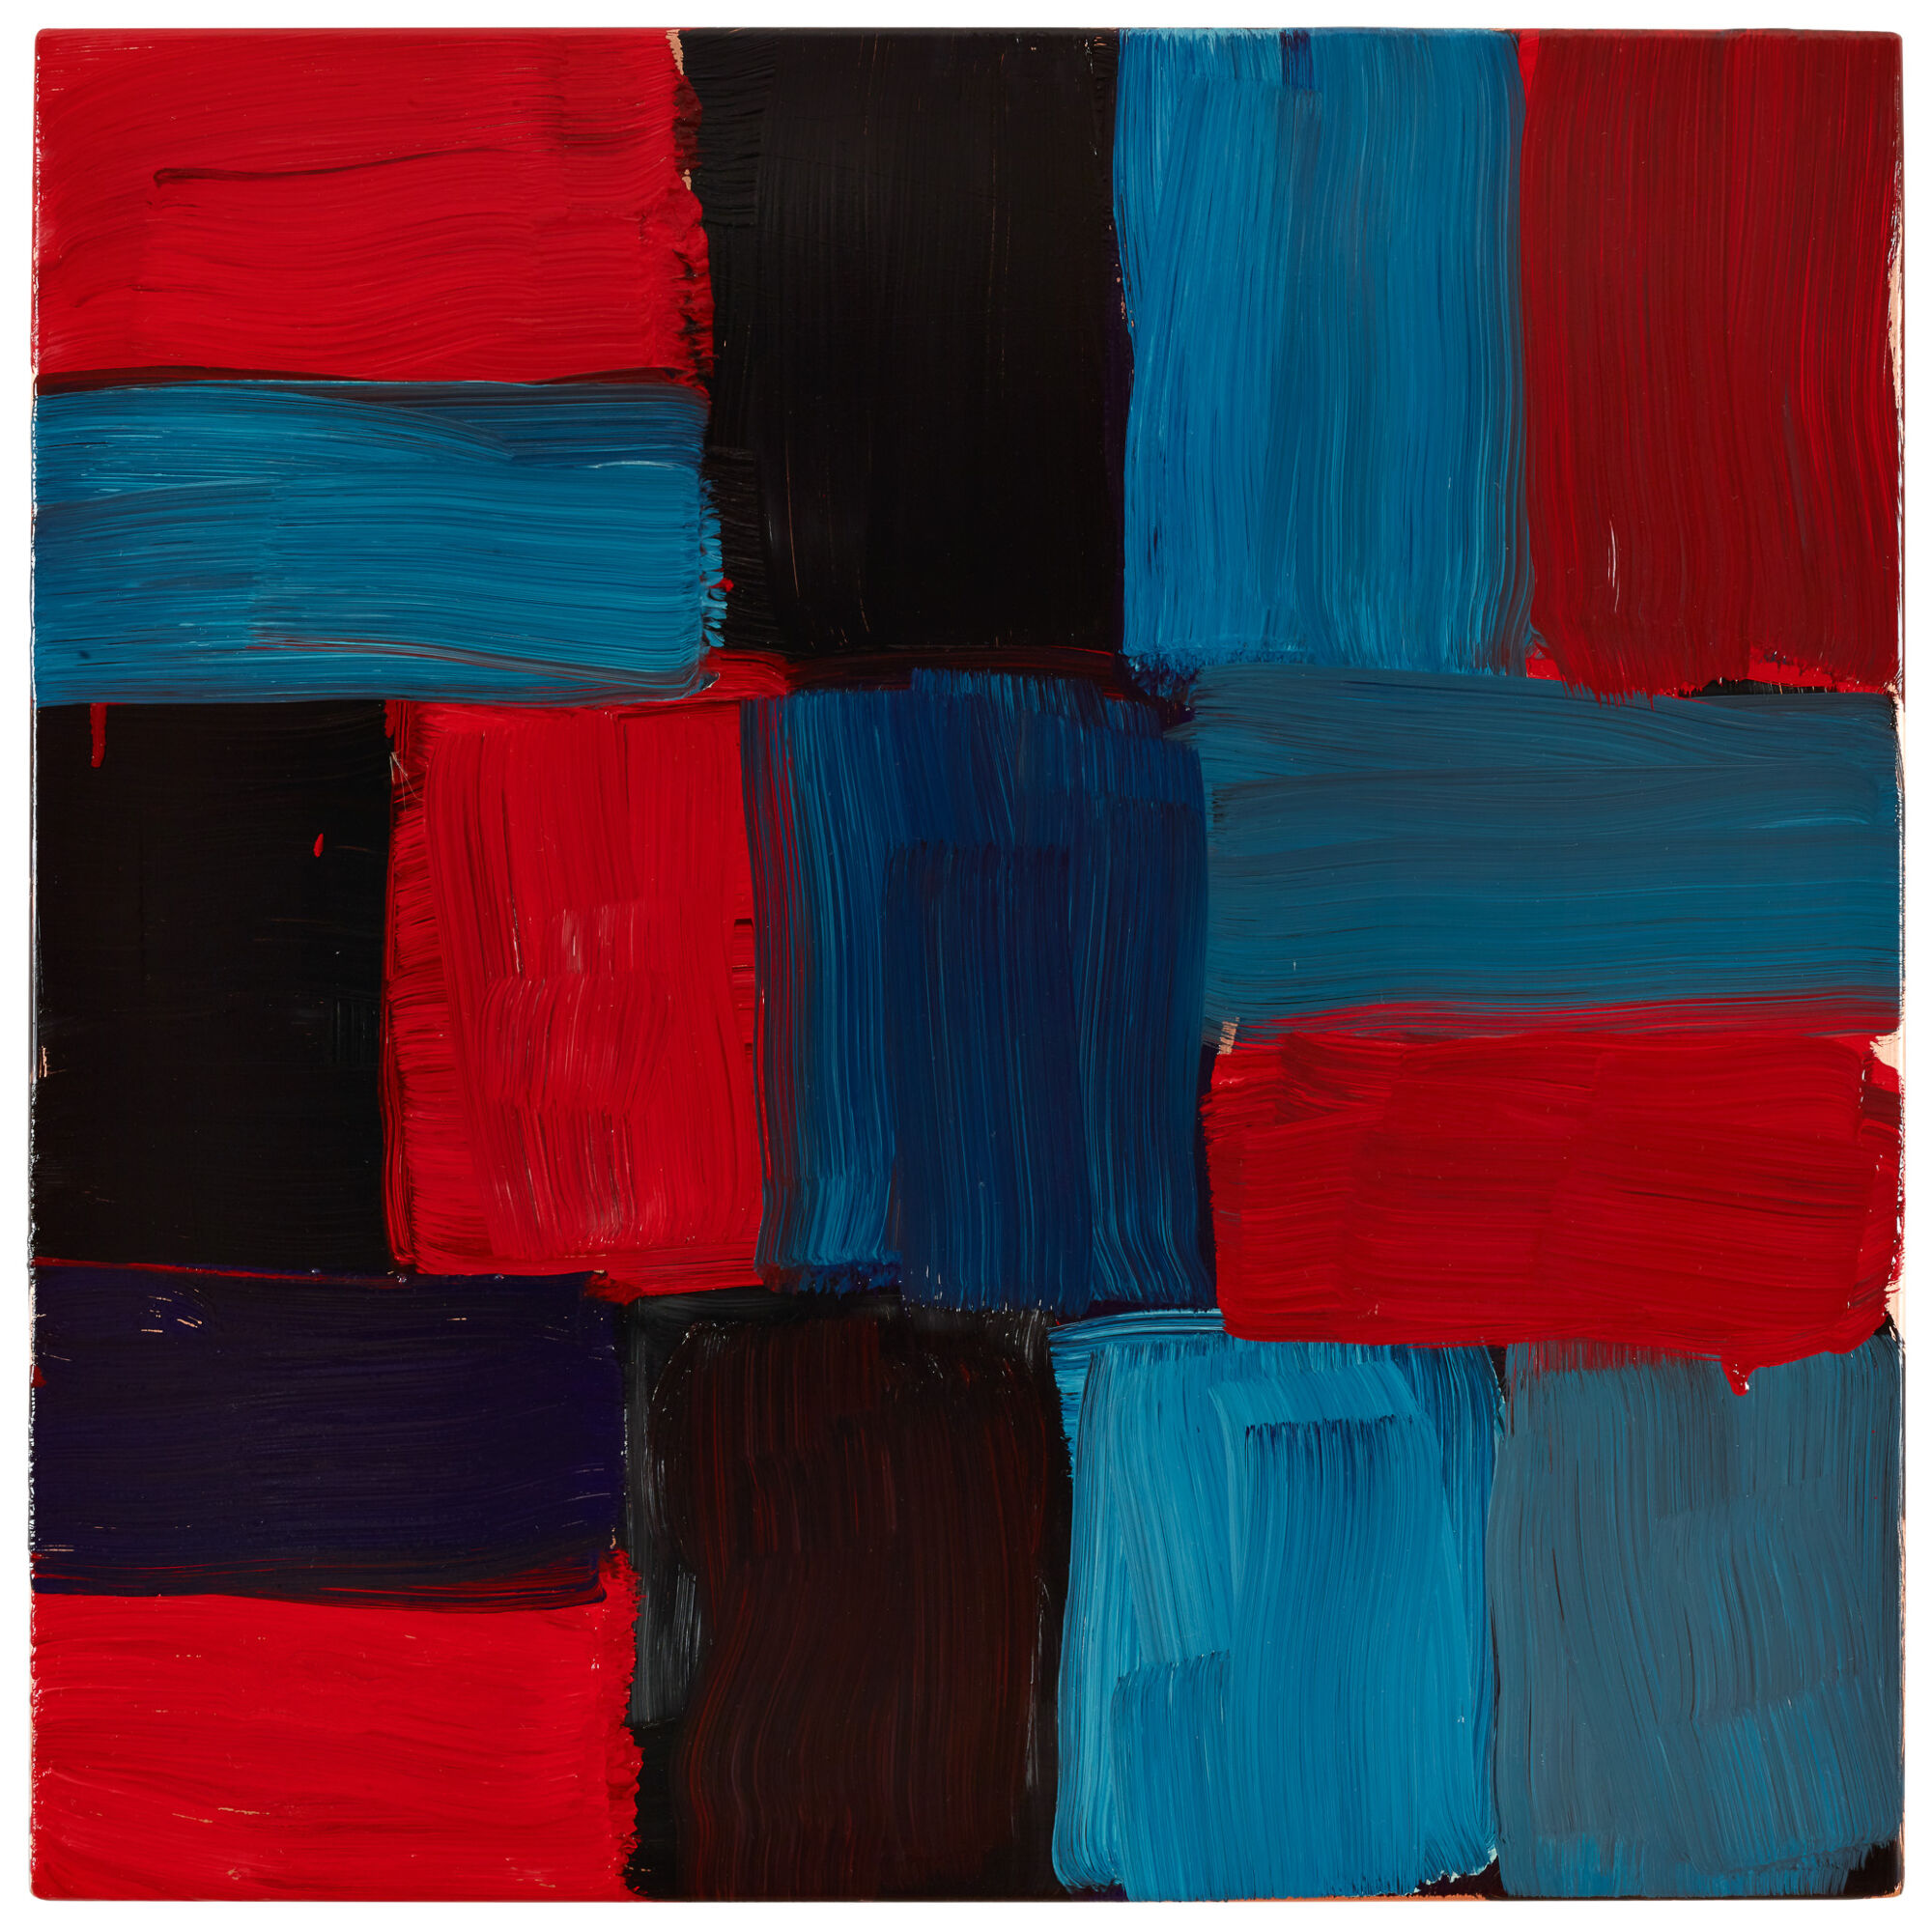 The Wick - Sean Scully 
Aix Wall 2, 2021
Oil on copper
50 x 50 cm.
© Sean Scully; Courtesy Lisson Gallery and Thaddaeus Ropac gallery
